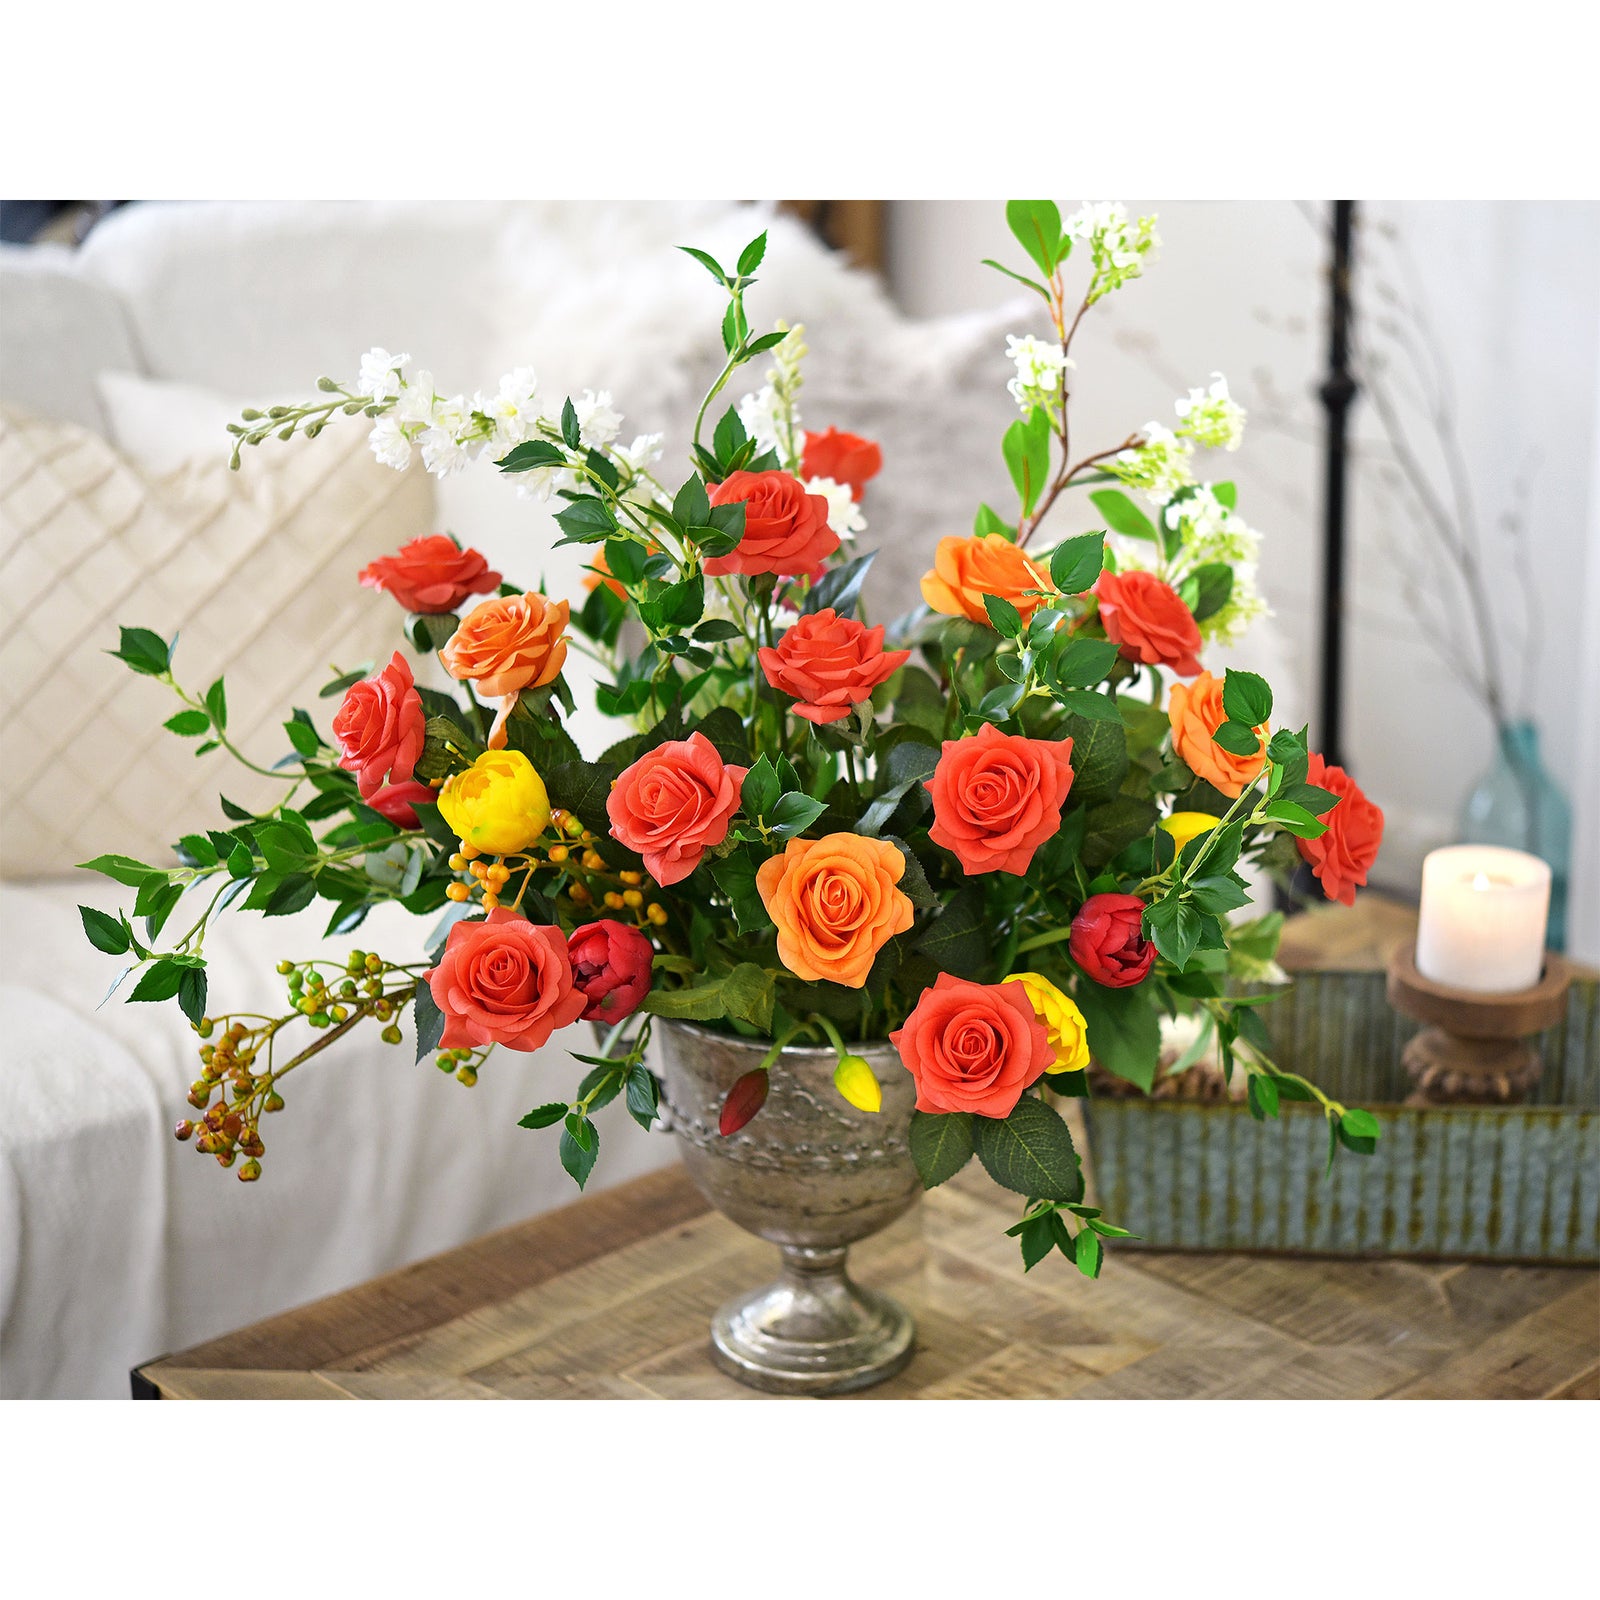 Sunset Orange Real Touch Roses Silk Artificial Flowers ‘Petals Feel and Look like Fresh Roses' (10 Stems)